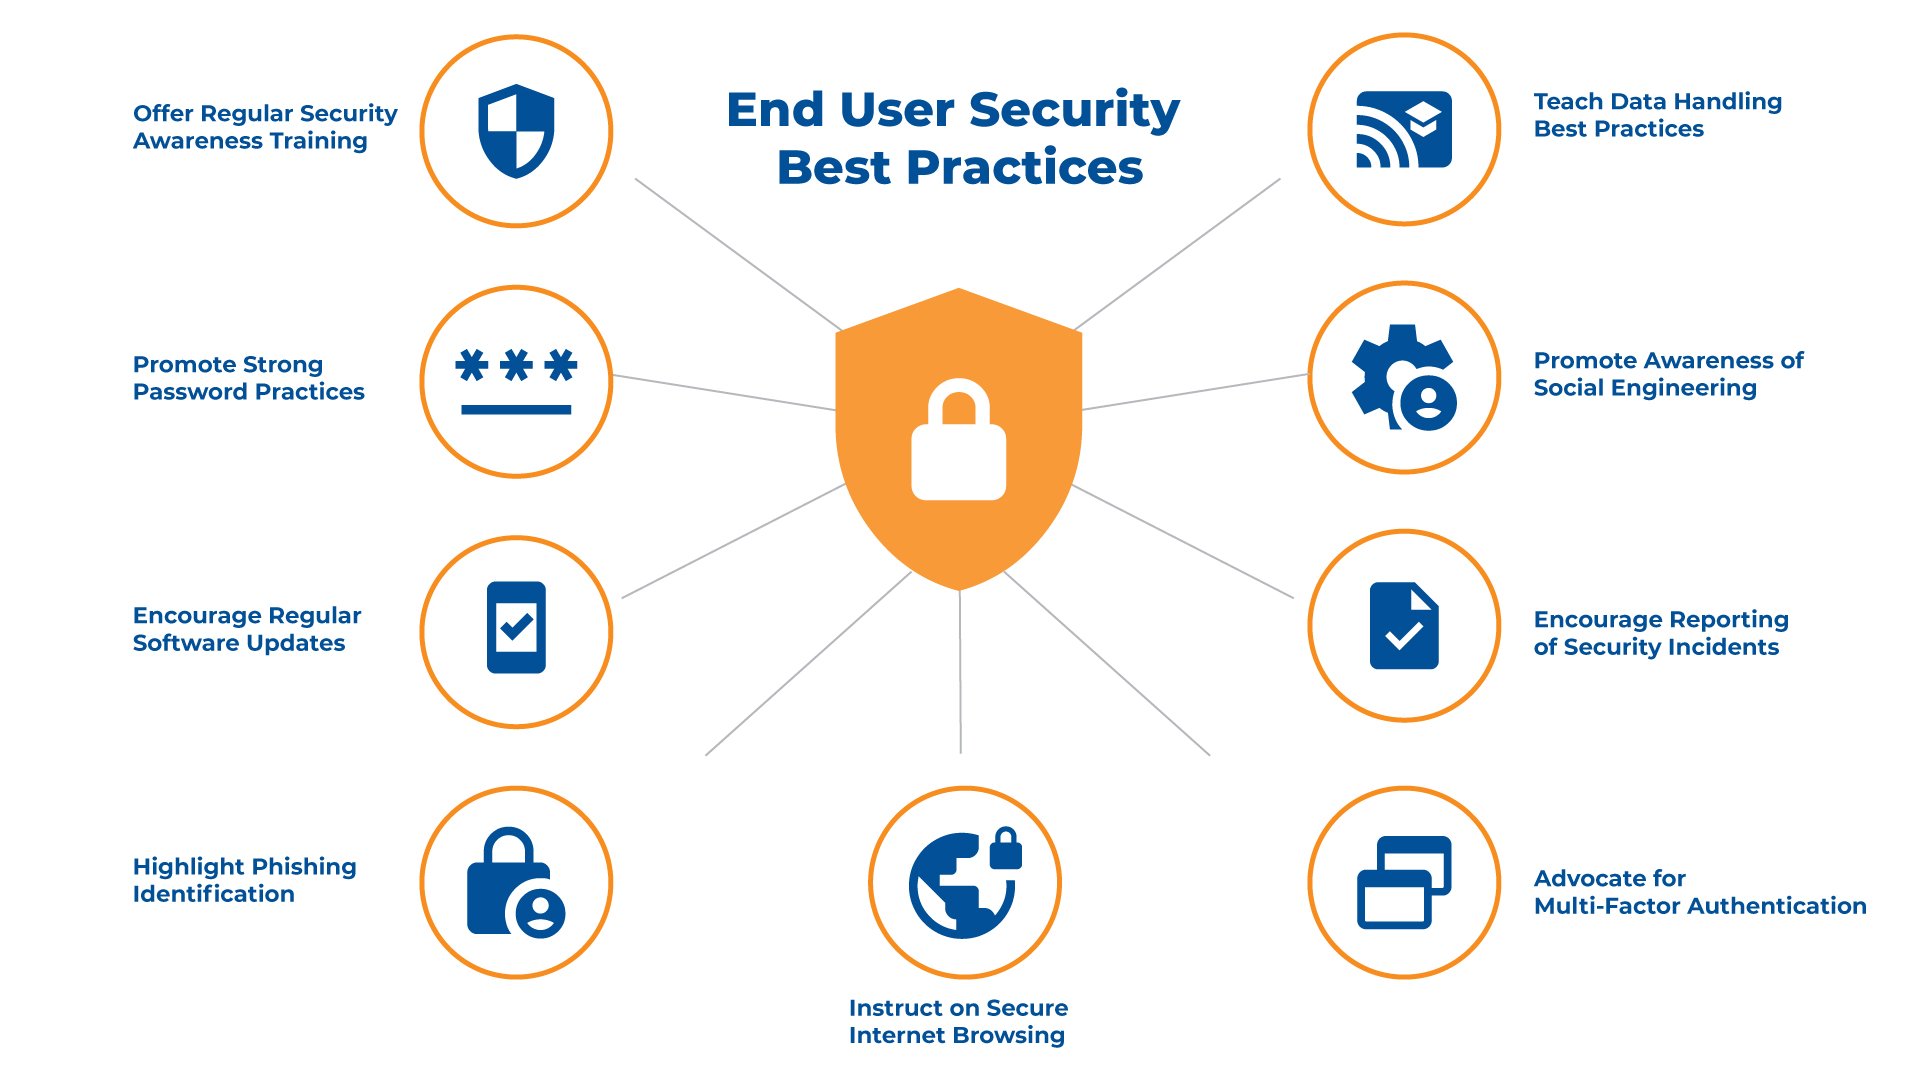 Tips to Implement End-user Security Best Practices 